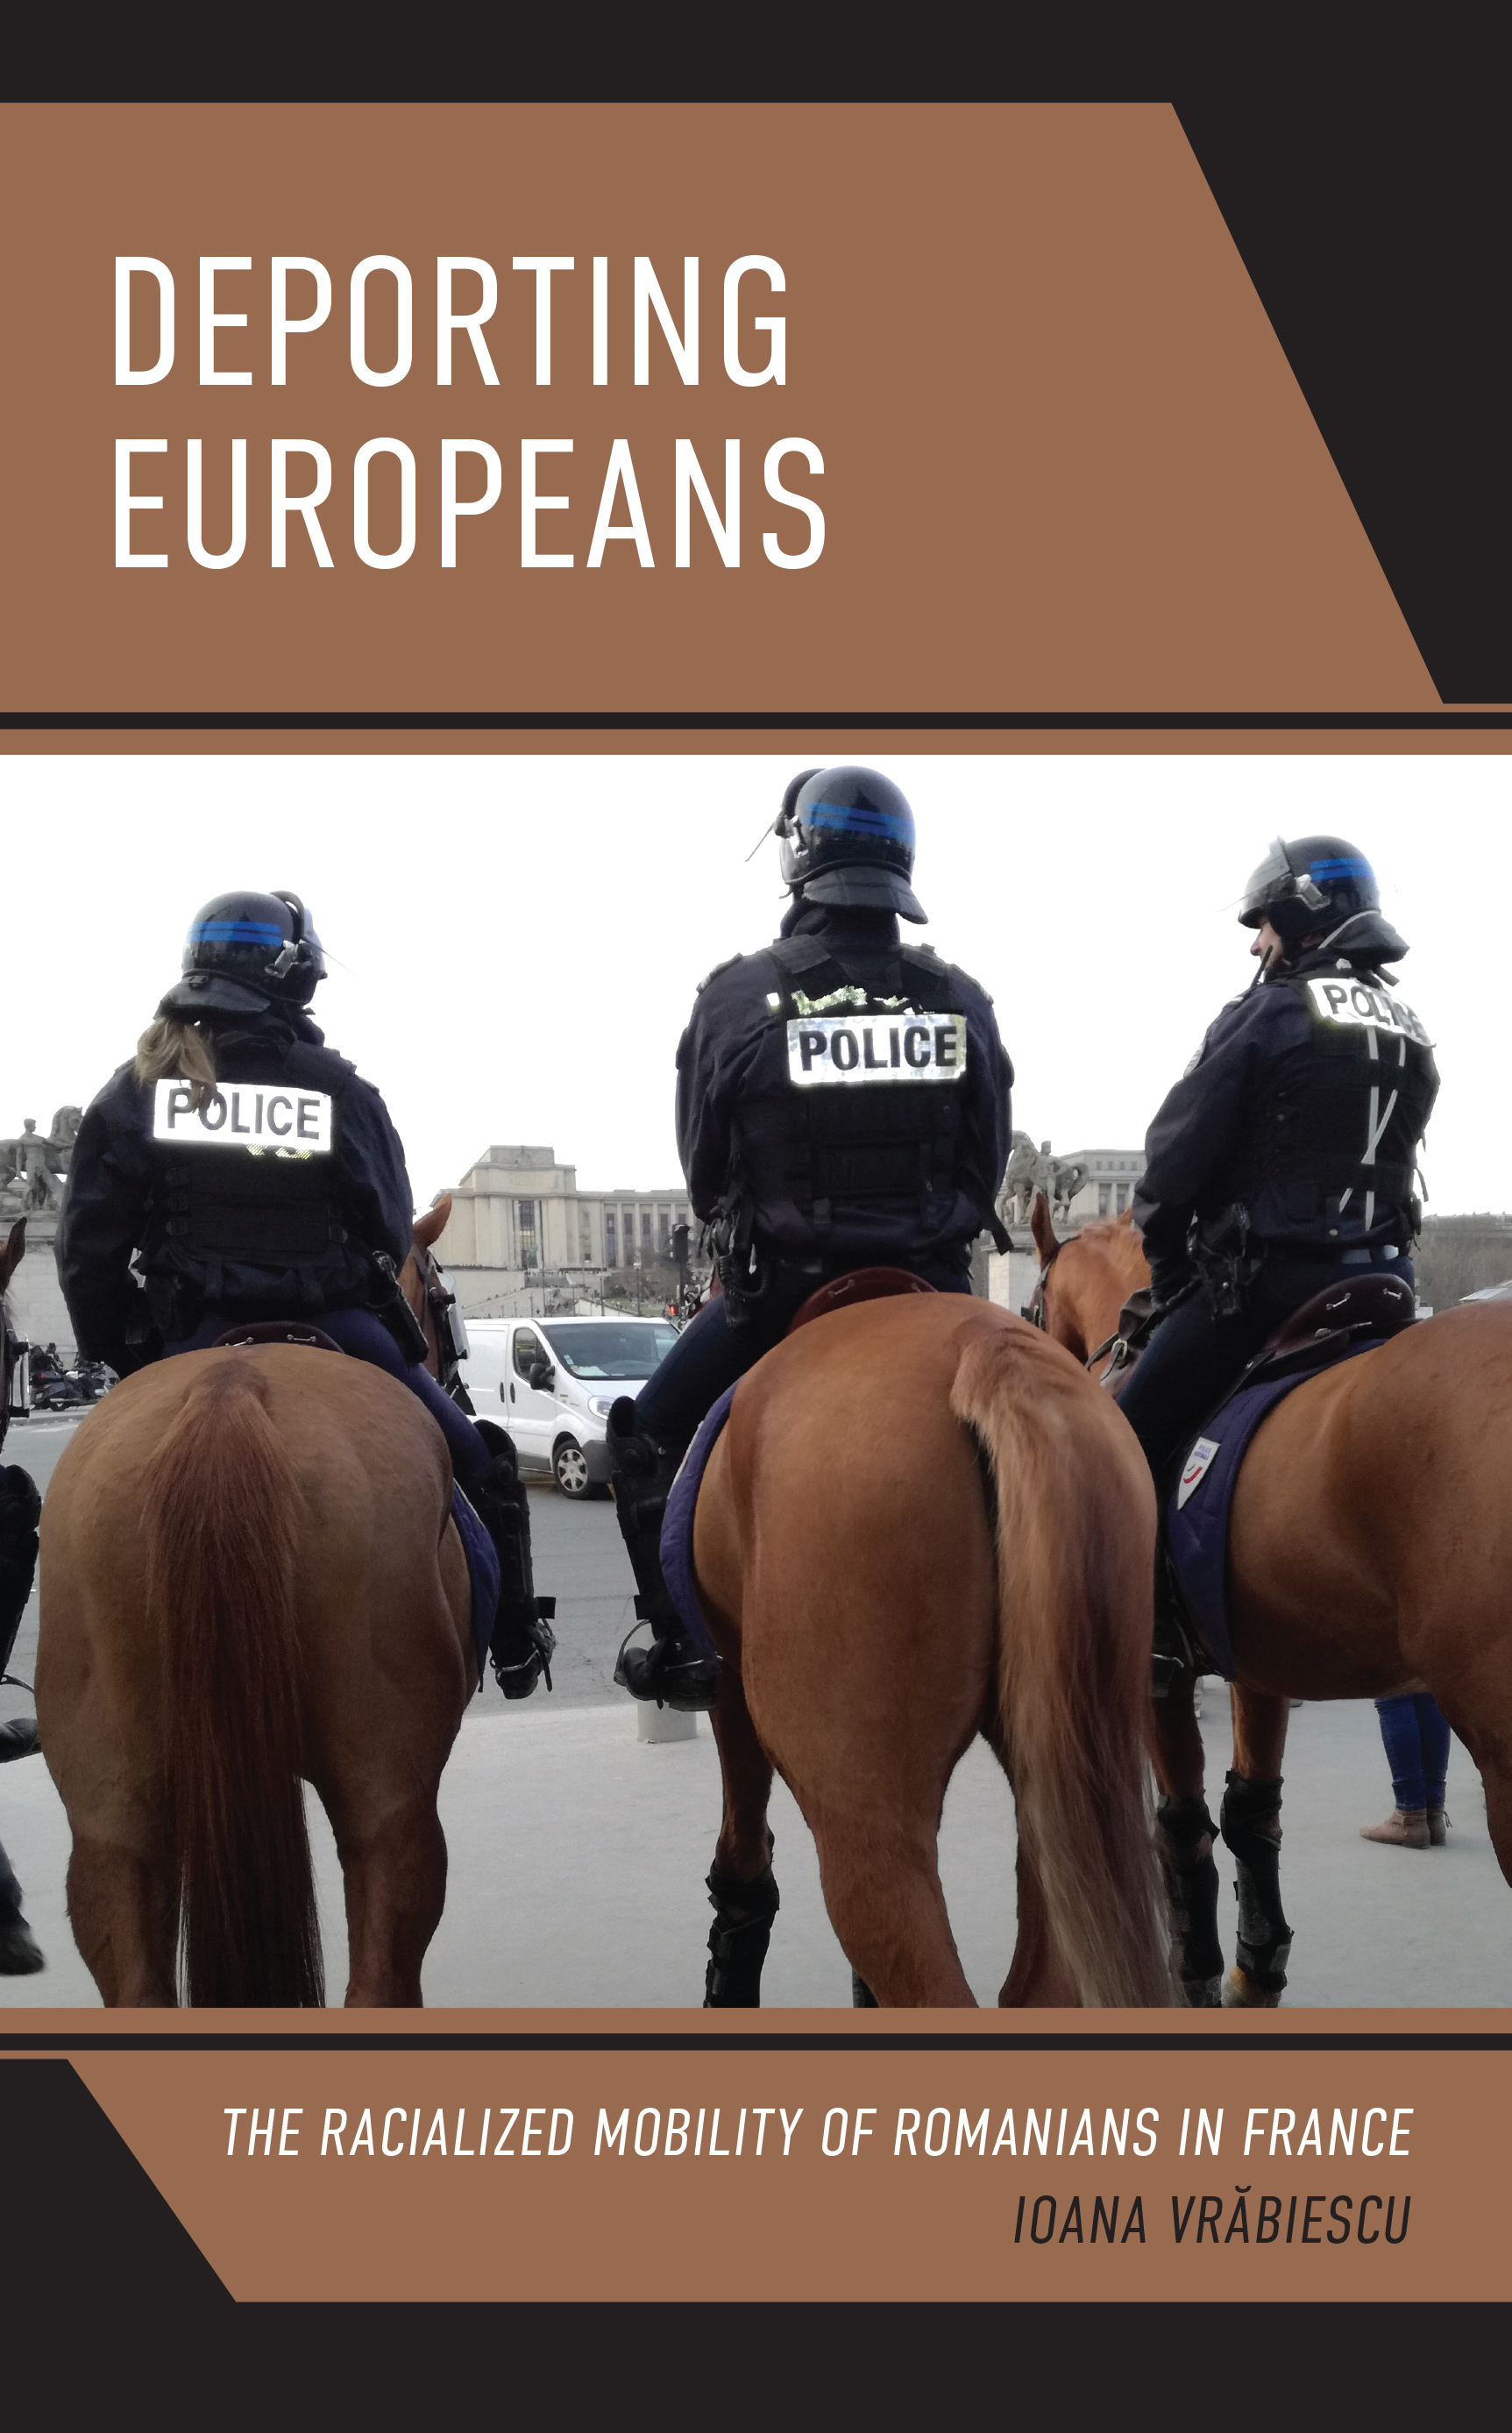 Deporting Europeans: The Racialized Mobility of Romanians in France